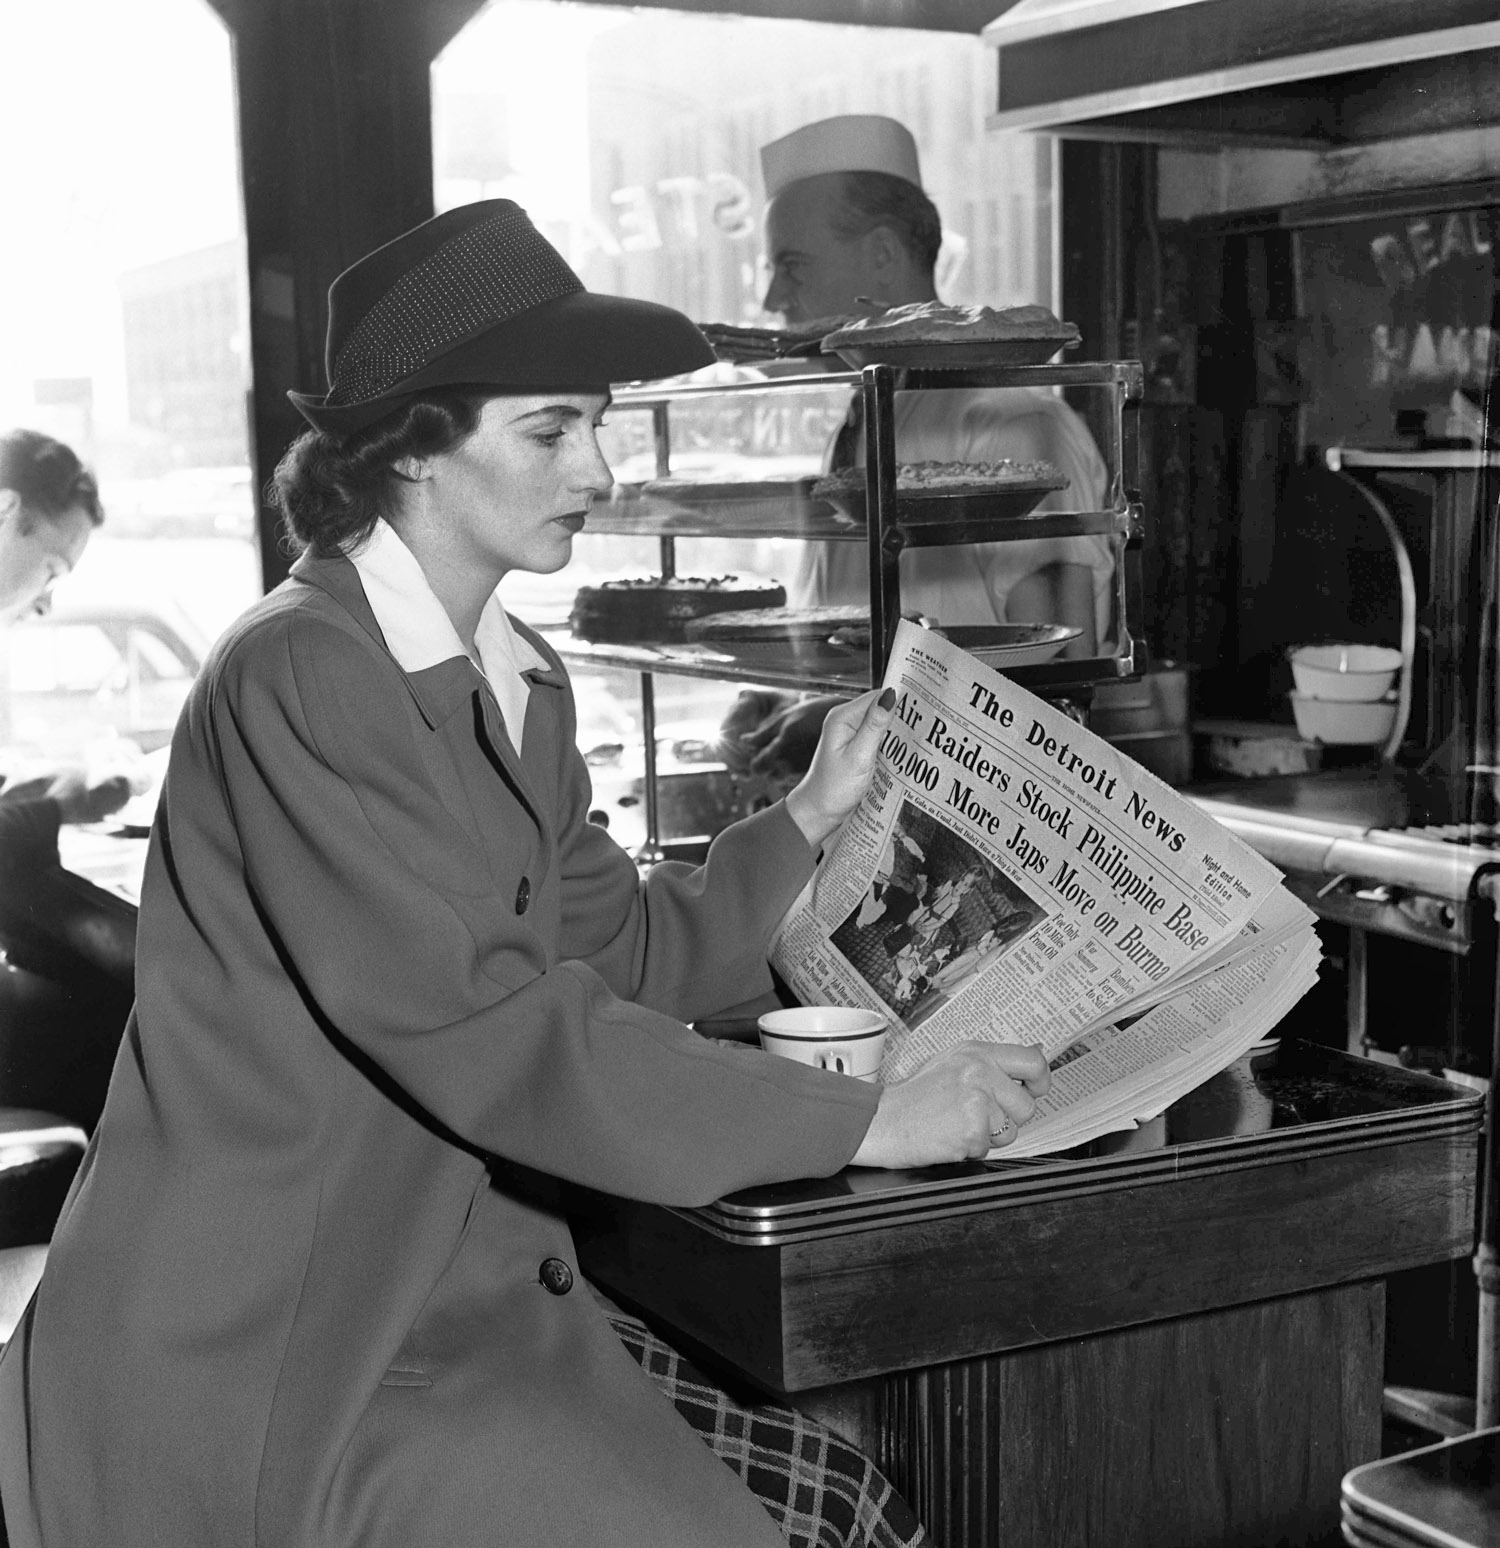 April 1942. An unknown diner reading World War 2 headlines from the Detroit News in a downtown Detroit cafe. Photo taken by my grandfather, Howard McGraw, of the Detroit News. Scanned from a 4x5 negative. View full size.